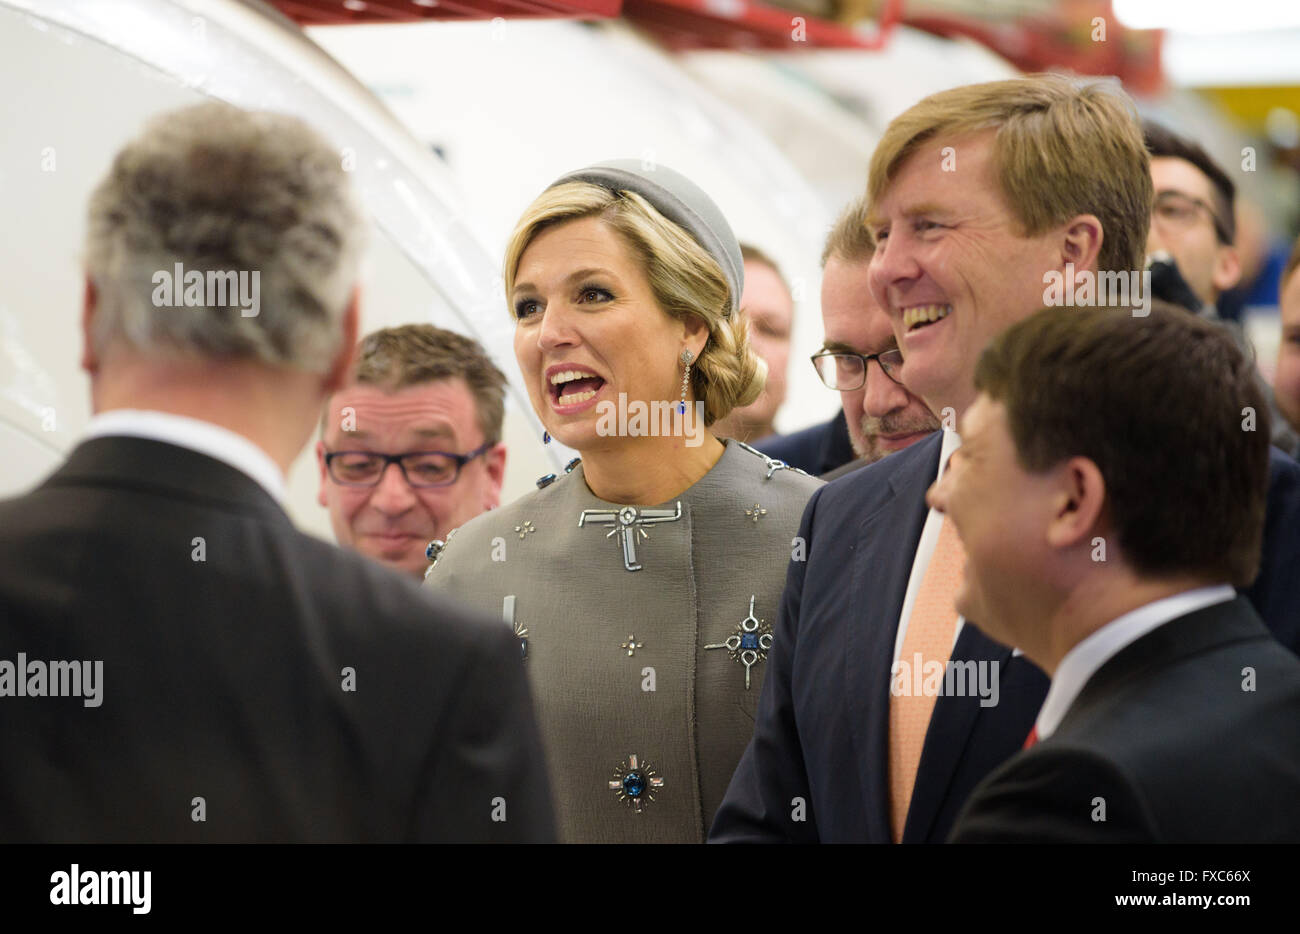 Erlangen, Germany. 14th Apr, 2016. Queen Maxima (C) and King Willem-Alexander (2.f.R) of the Netherlands visit Siemens Healthcare in Erlangen, Germany, 14 April 2016. The Dutch royal couple are on a two-day visit to Bavaria. Photo: NICOLAS ARMER/dpa/Alamy Live News Stock Photo